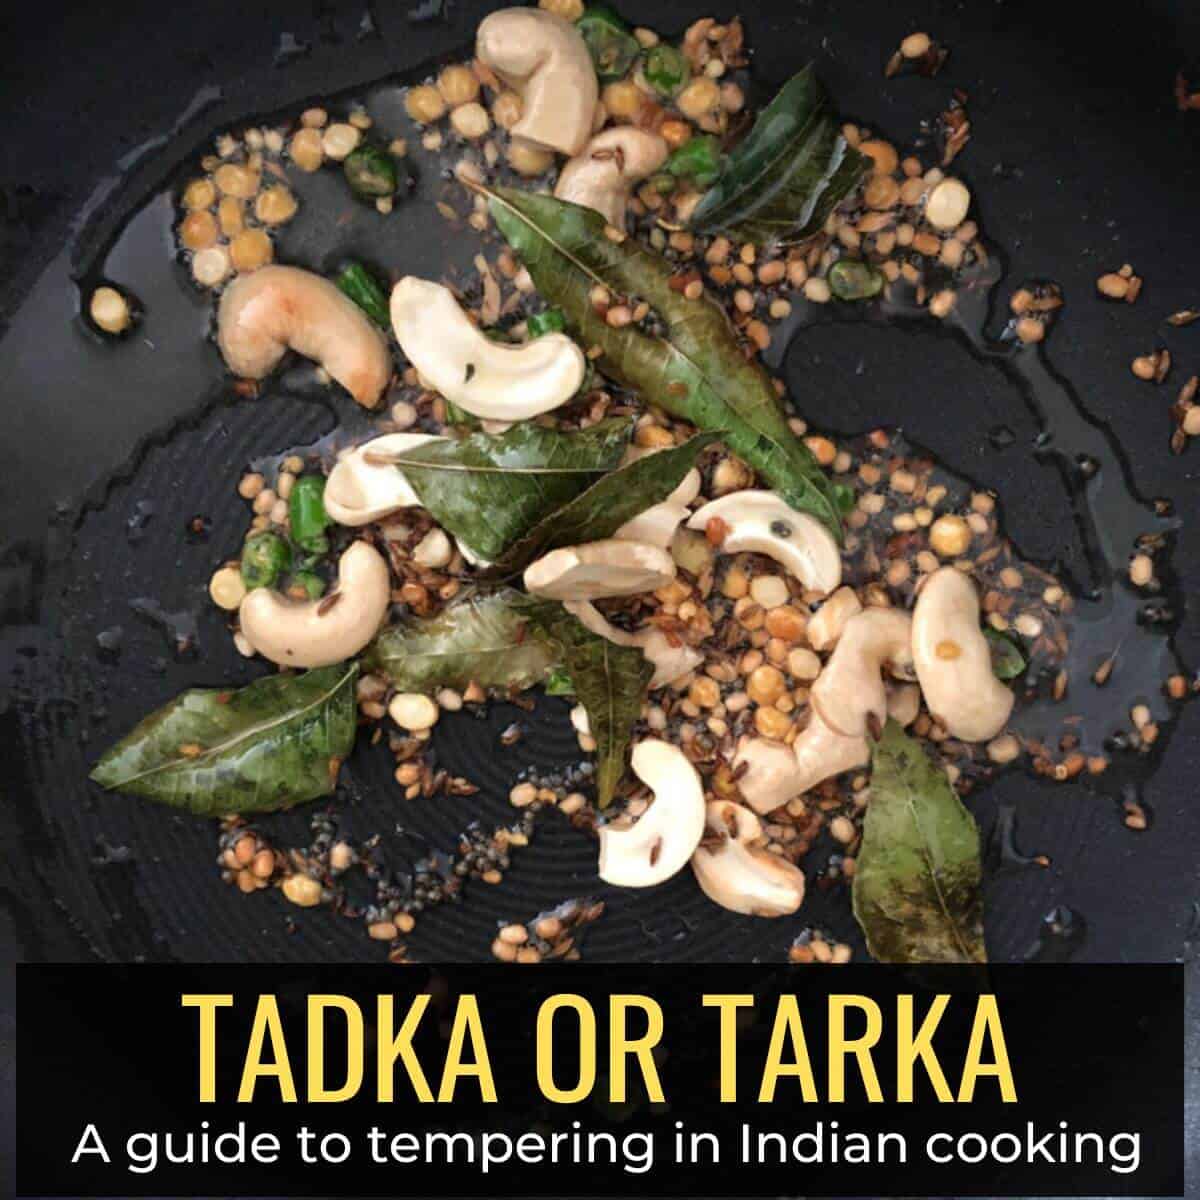 The Art of Tadka (Indian Tempering) Explained